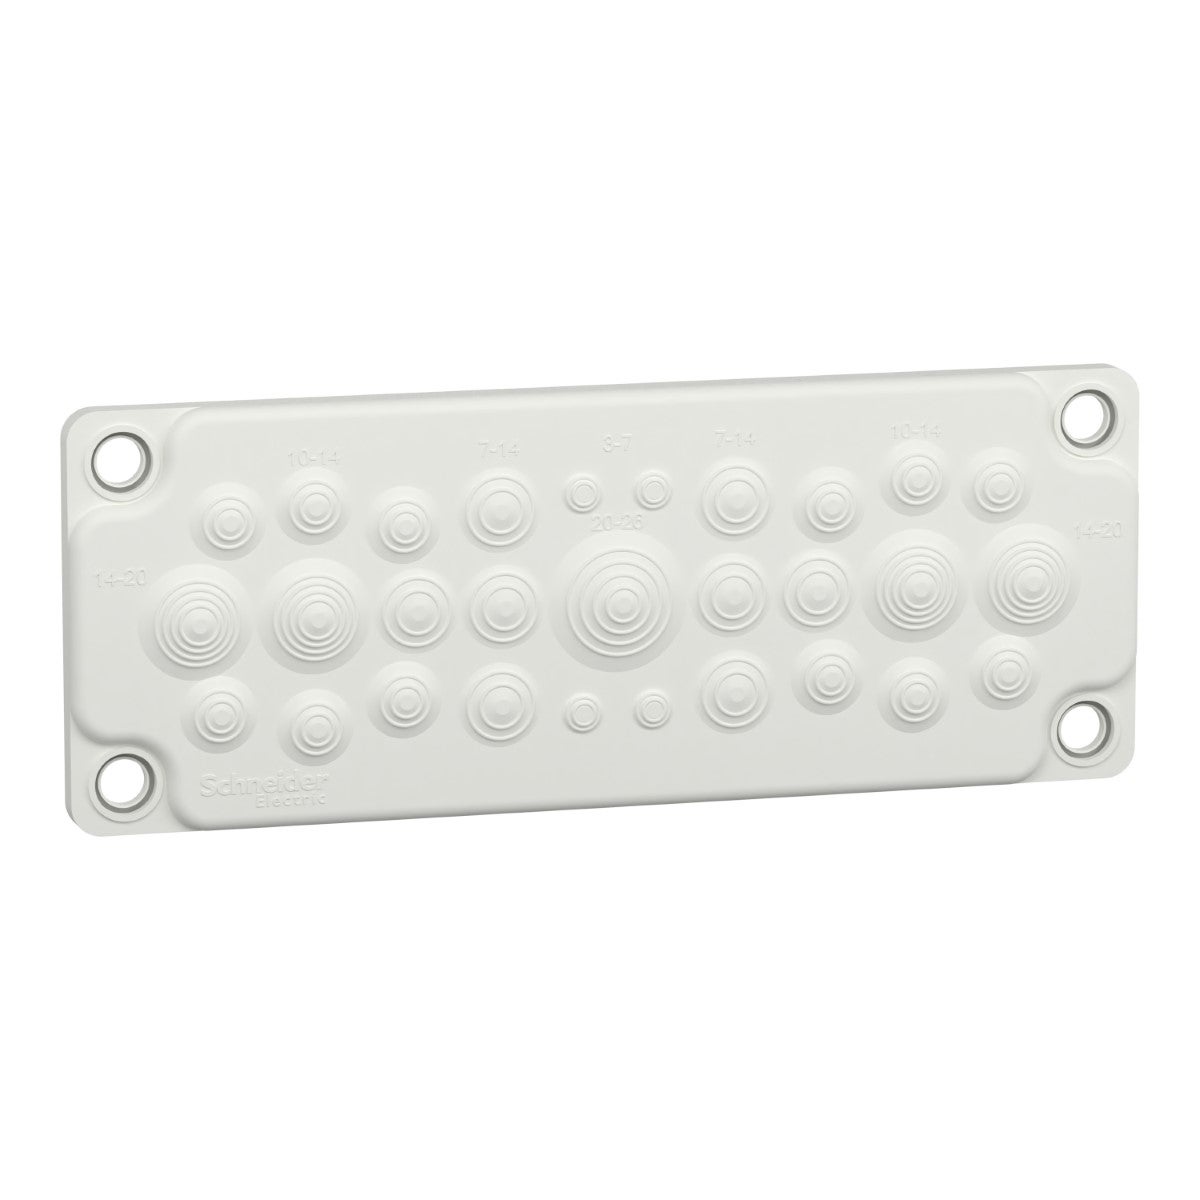 Gland plate, PrismaSeT G, membrane type, 29 entries with dia 5 to 26mm, Insulated, IP55, white, RAL 9003